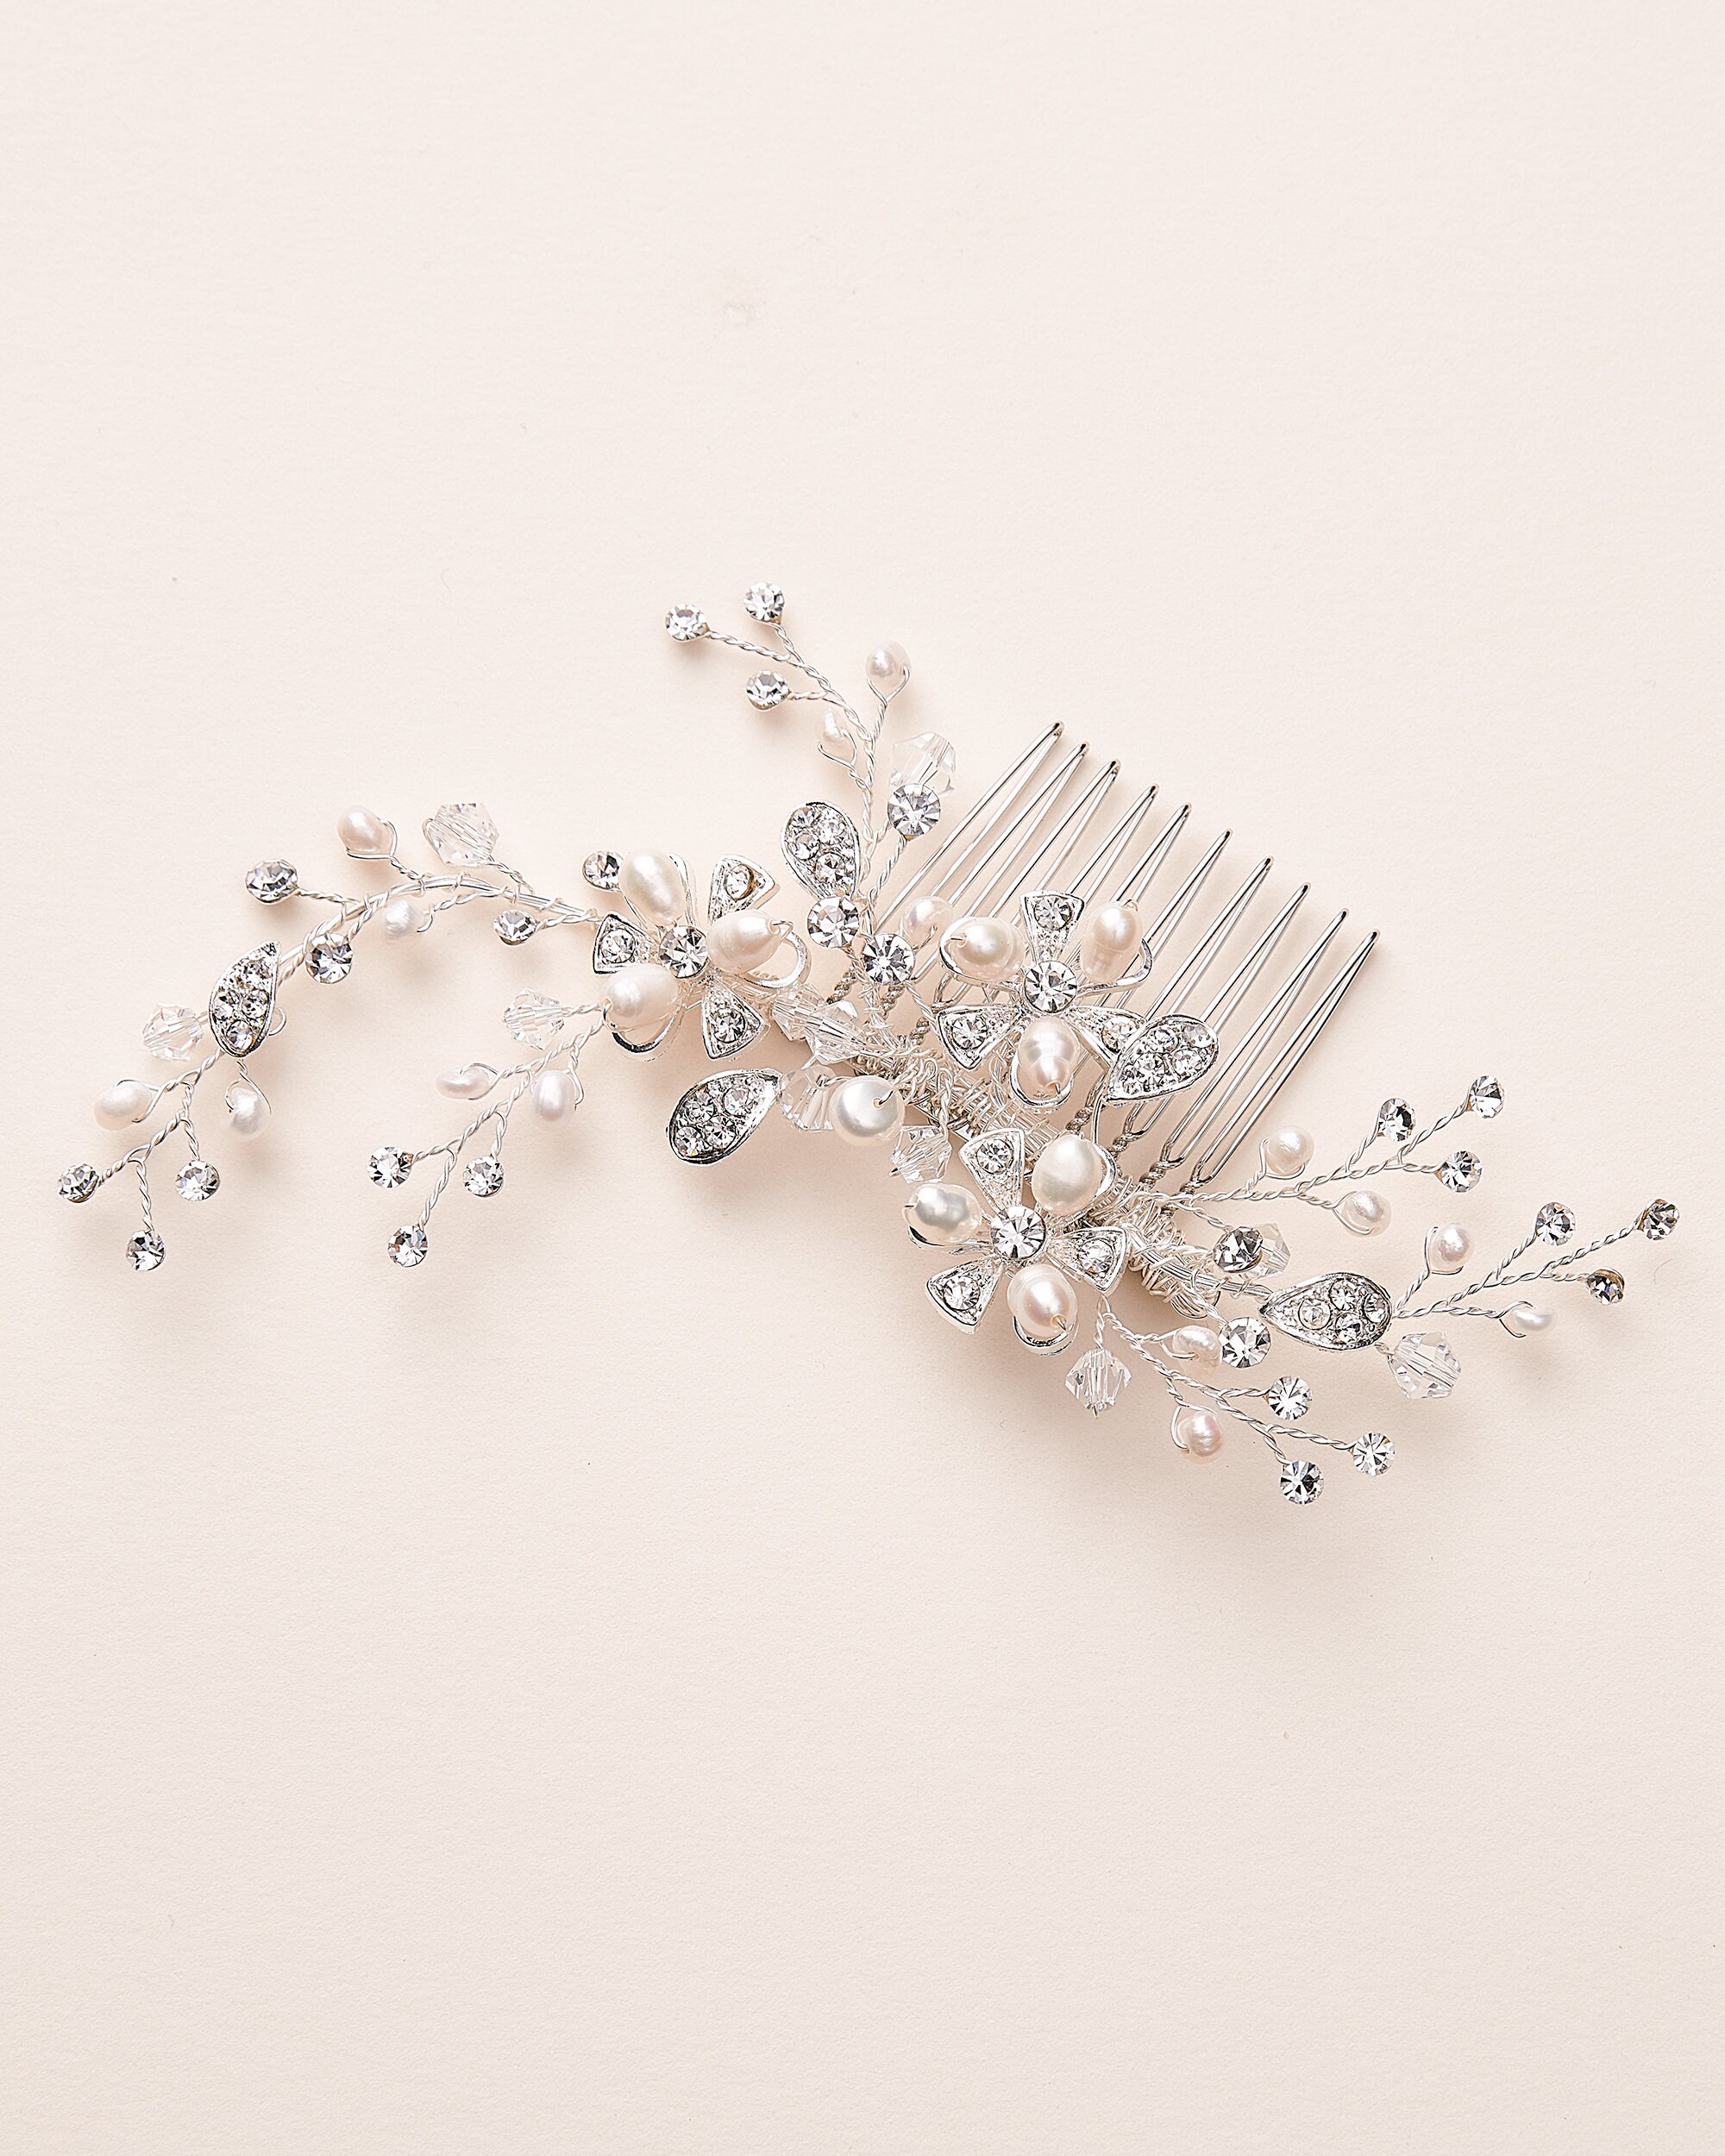 Zinnia Bridal Hair Comb with Full Pavé Crystal and Art-deco Detailing